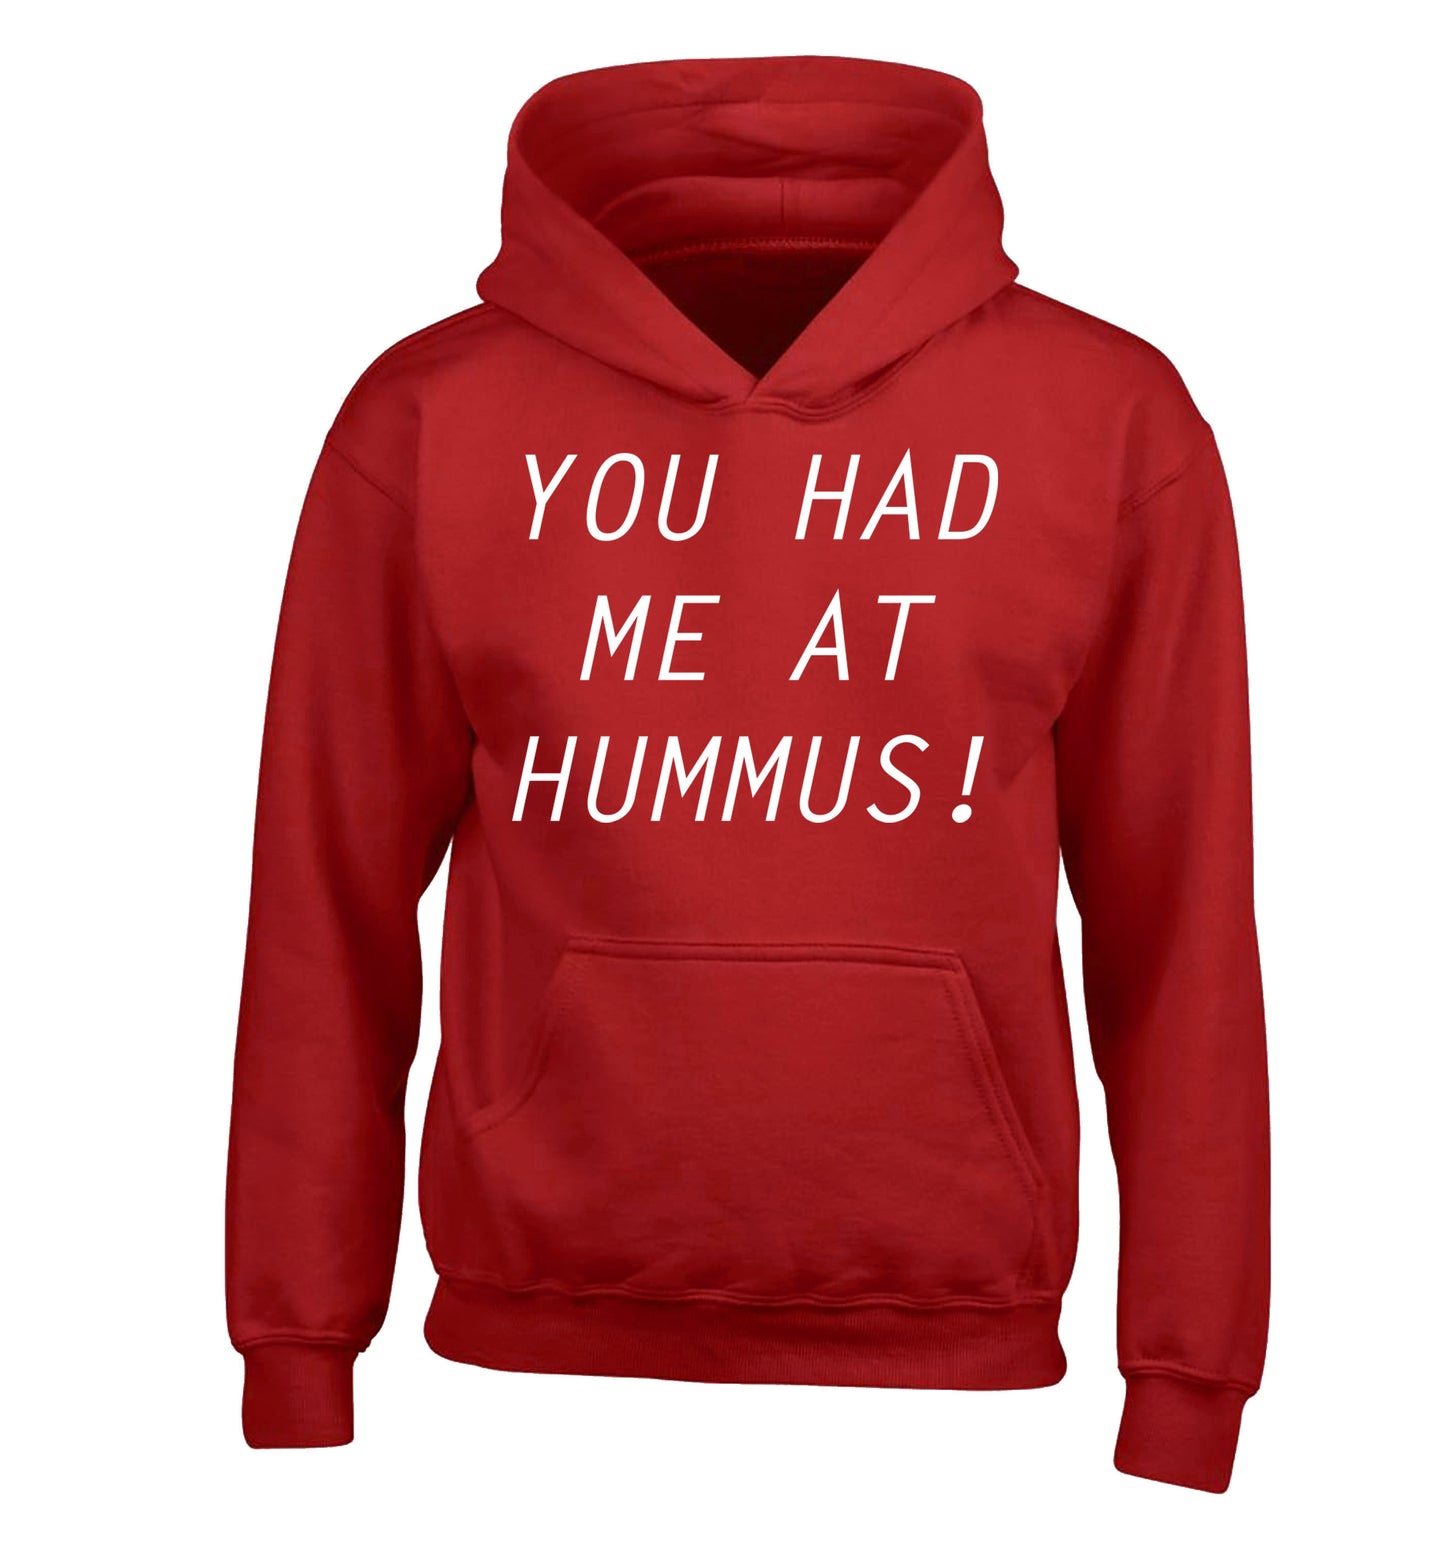 You had me at hummus children's red hoodie 12-14 Years